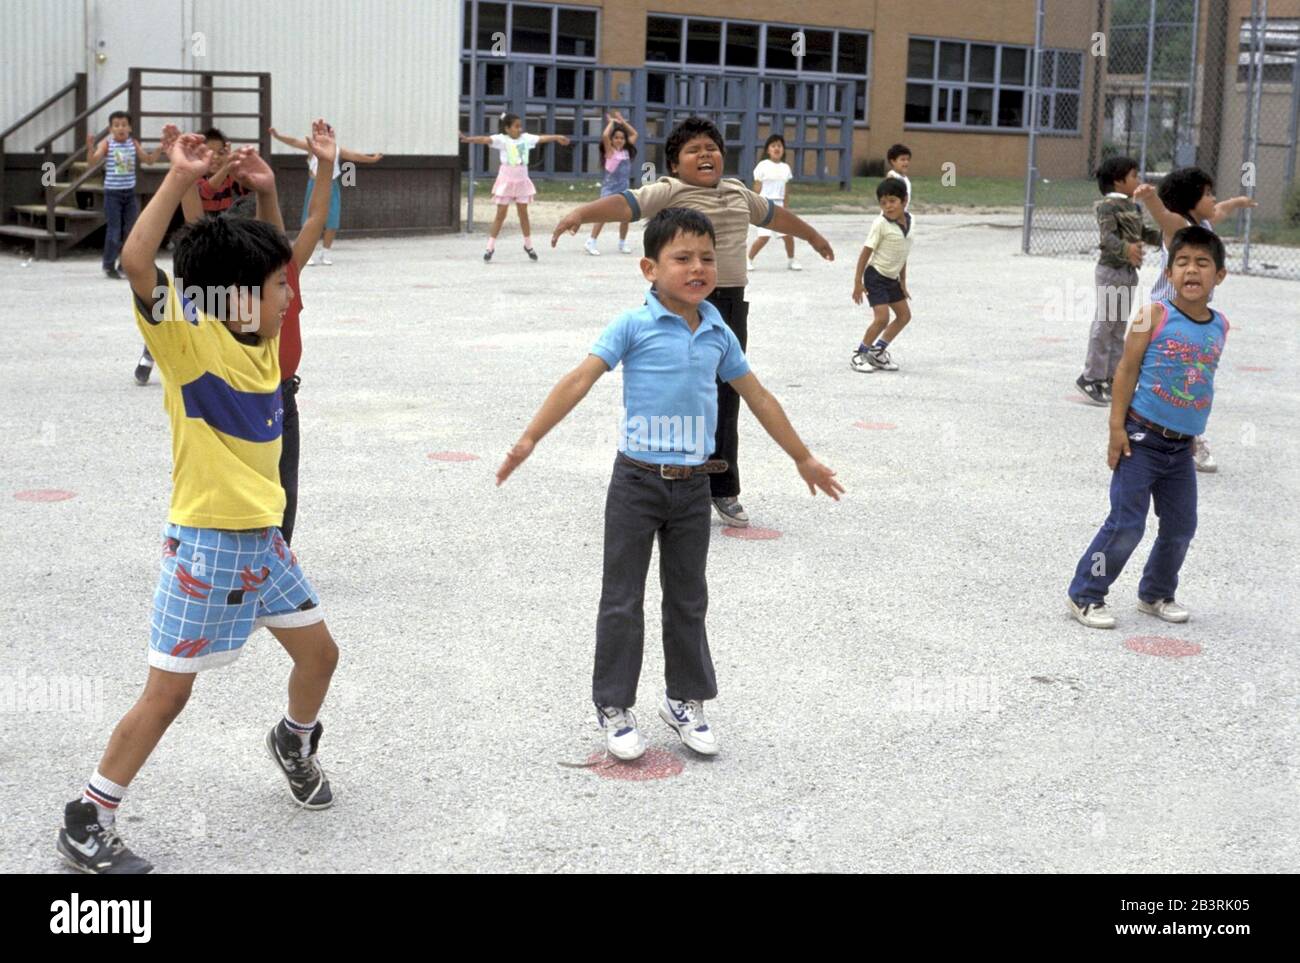 San Antonio, Texas USA, circa 1992: Texas school funding crisis-- Elementary school students do jumping jacks on a poorly maintained asphalt surface during physical education class at Frey School in the chronically underfunded Edgewood School District. ©Bob Daemmrich Stock Photo